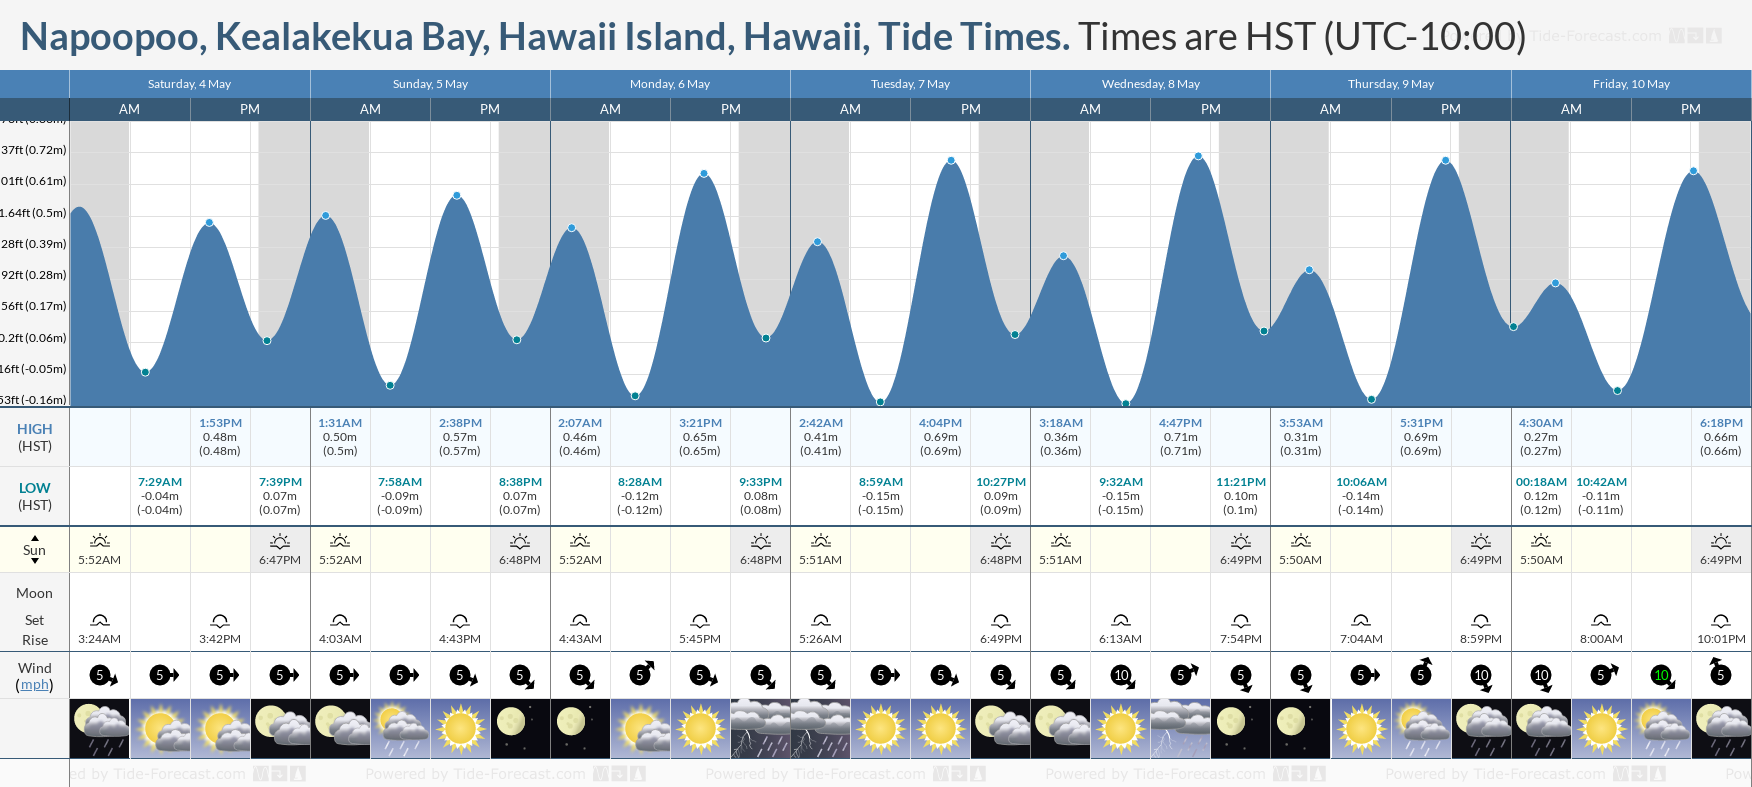 Napoopoo, Kealakekua Bay, Hawaii Island, Hawaii Tide Chart including high and low tide times for the next 7 days